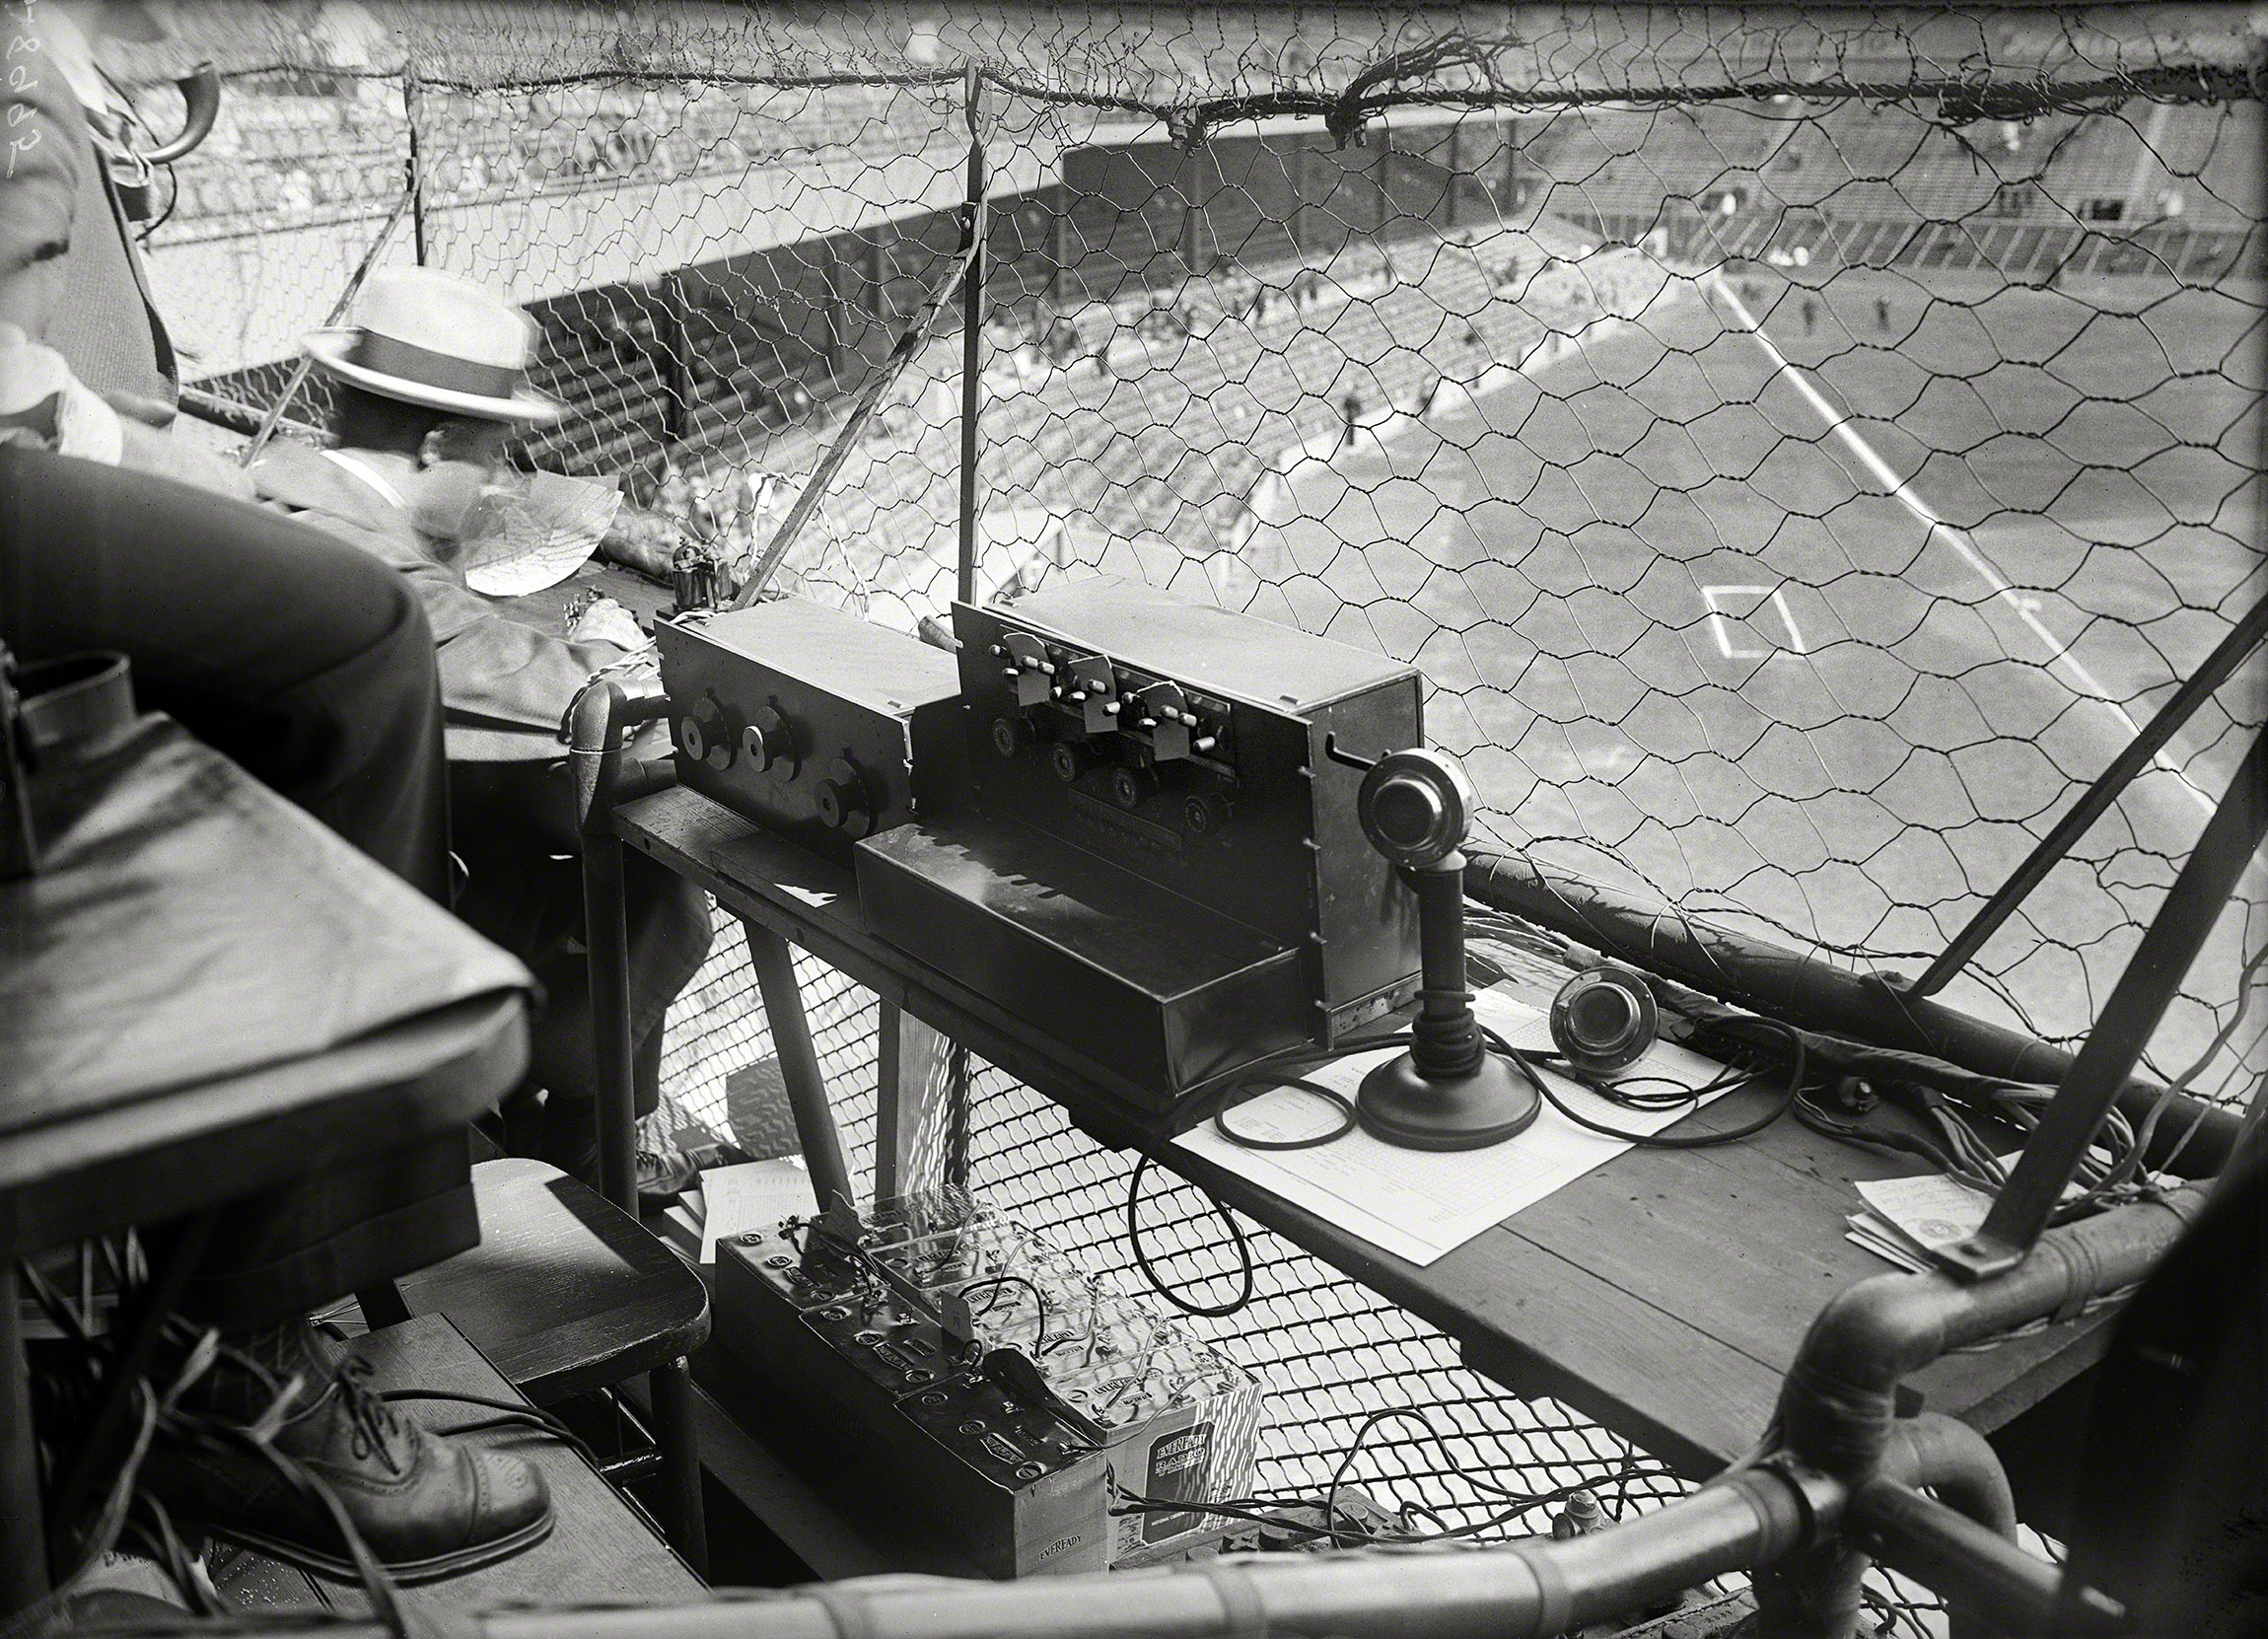 "Washington baseball, 1924." The broadcasting cage at Griffith Stadium in the early days of commercial radio. Harris & Ewing glass negative. View full size.